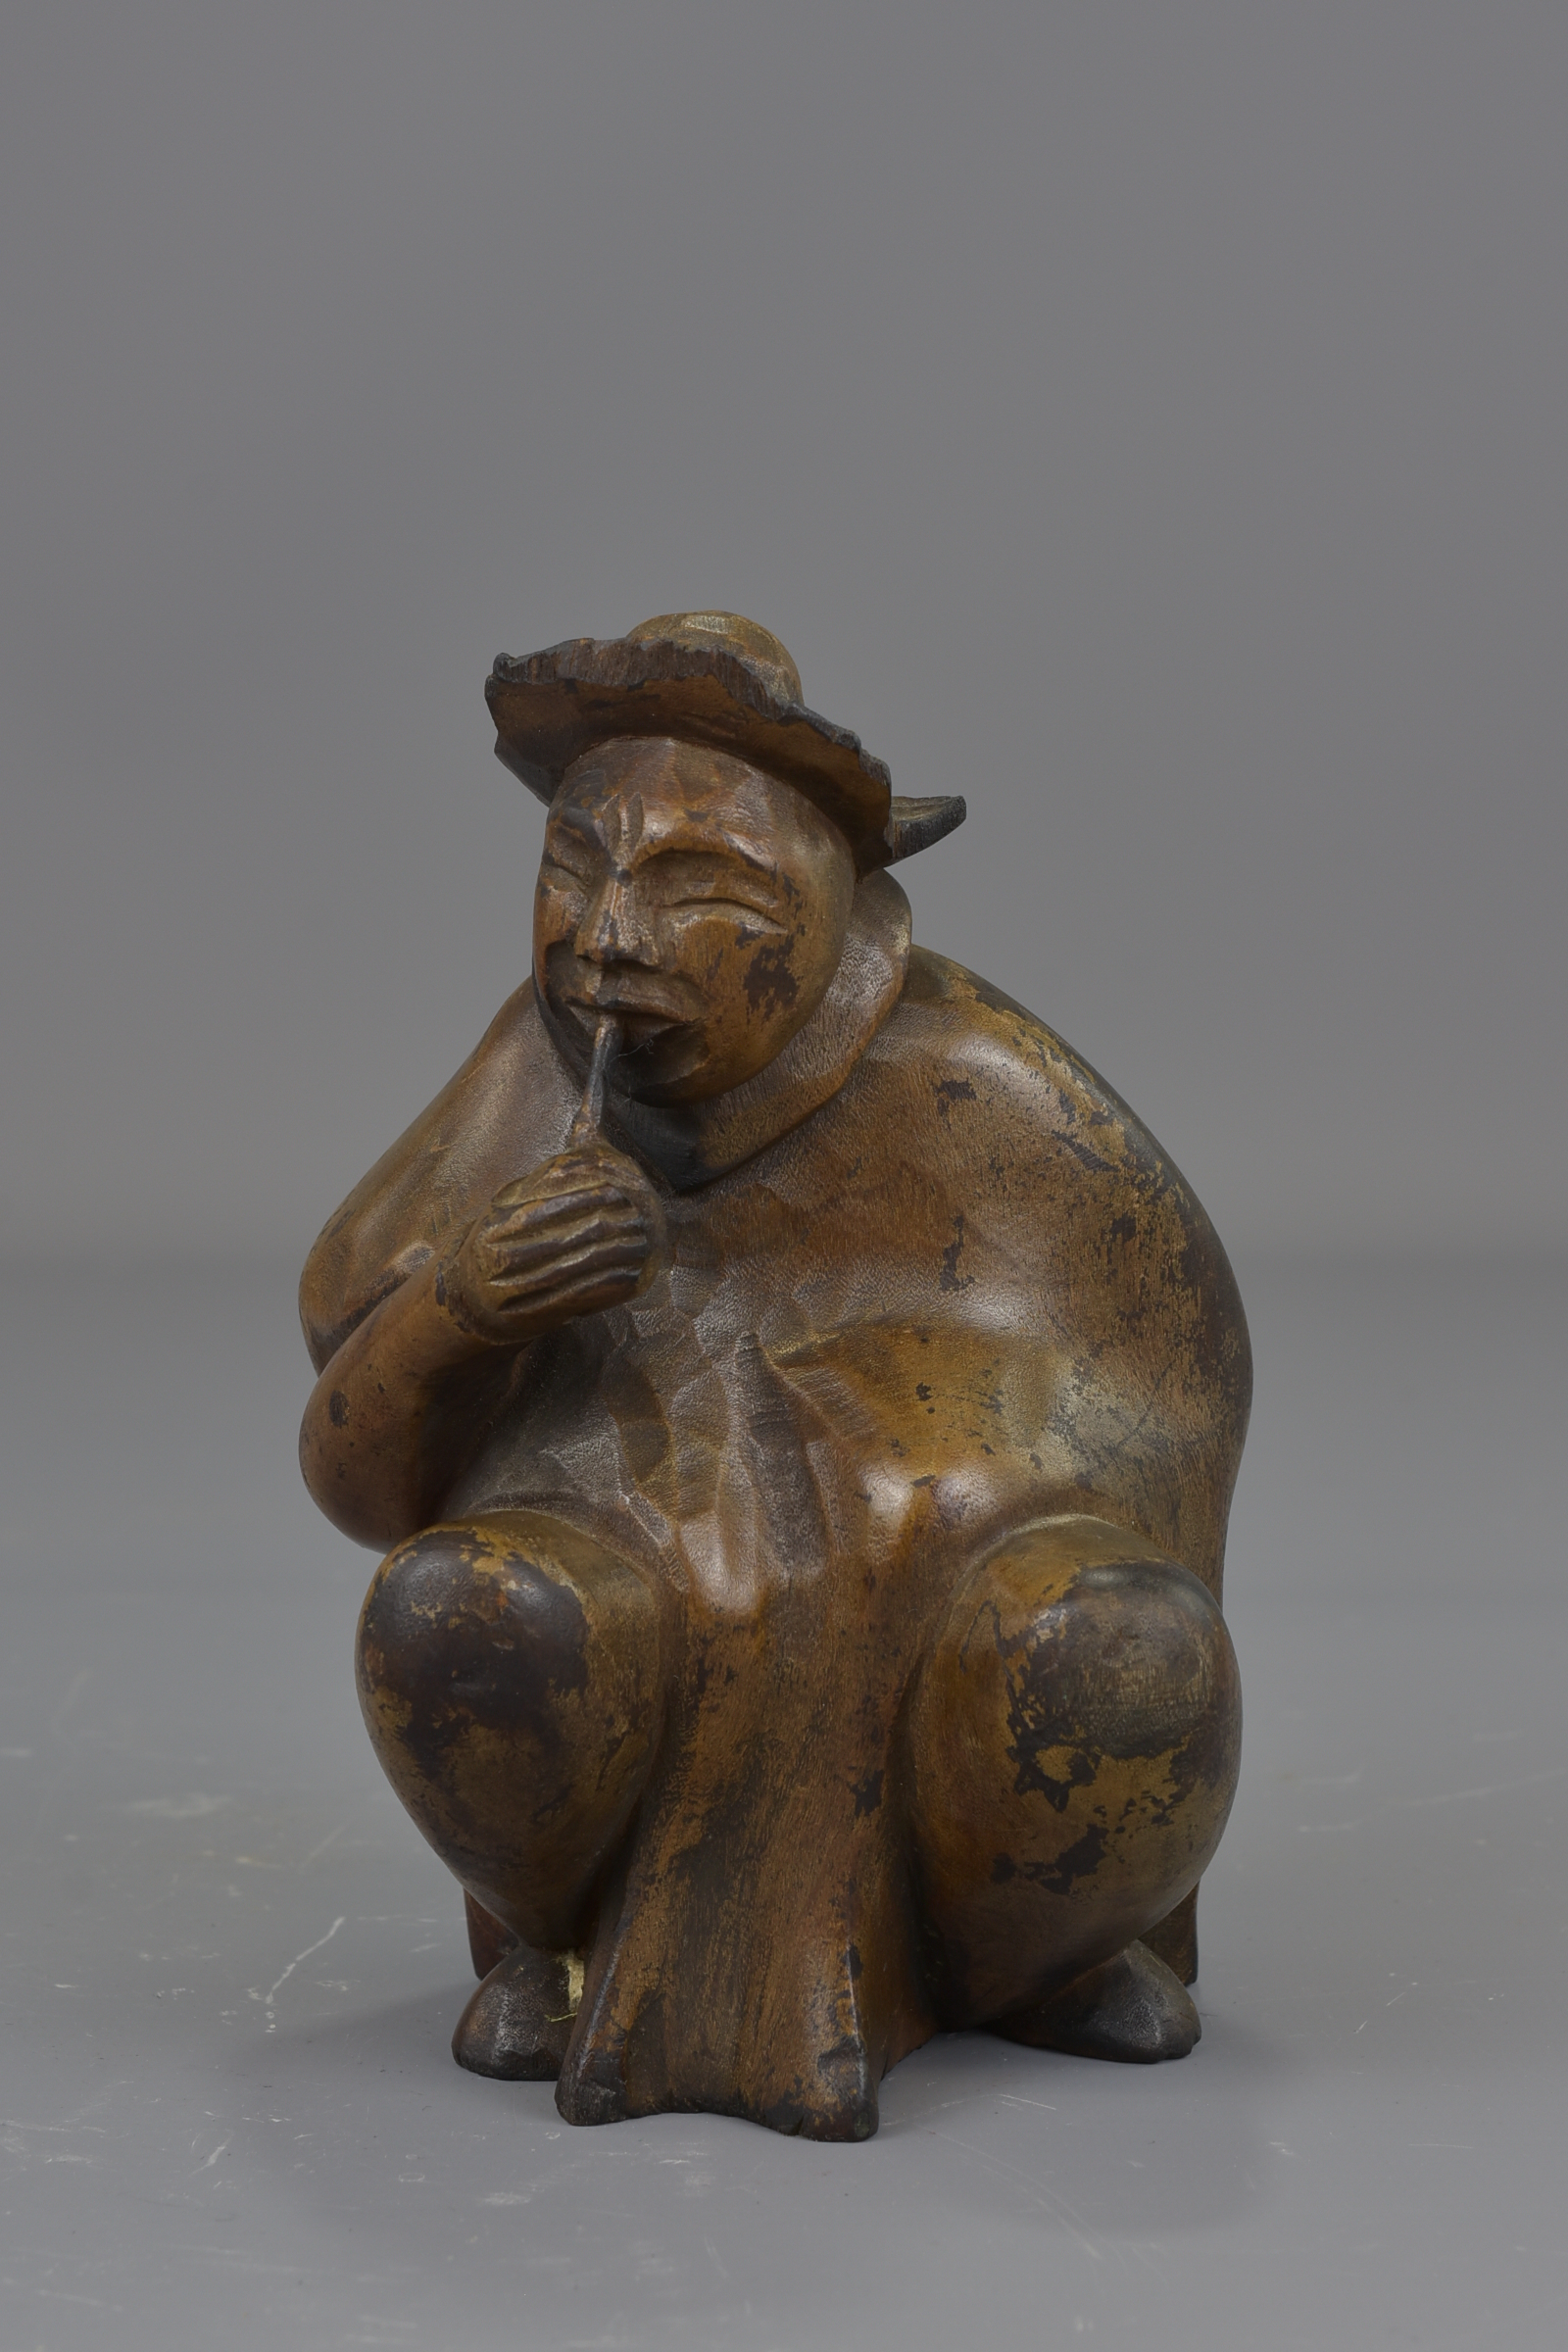 A Japanese 19th century carved wooden seated figure. 14 cm tall.